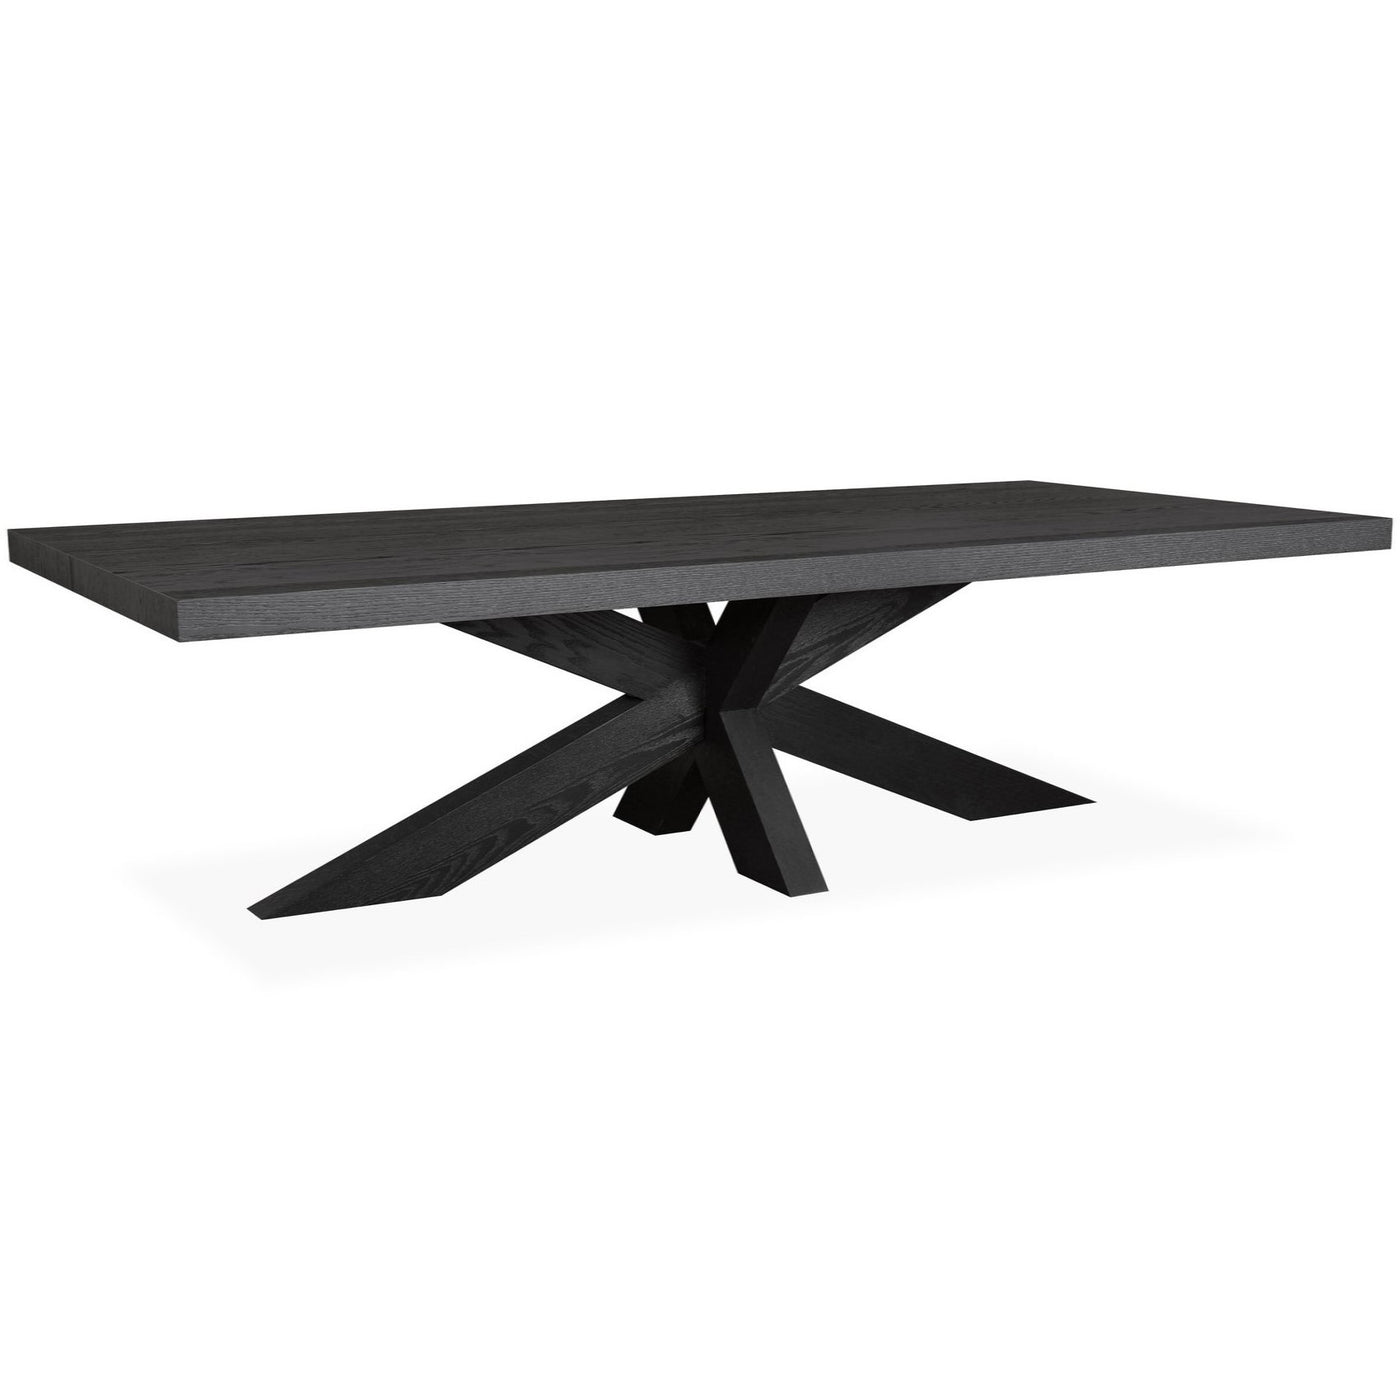 Cubano Rectangle Dining Table 280cm